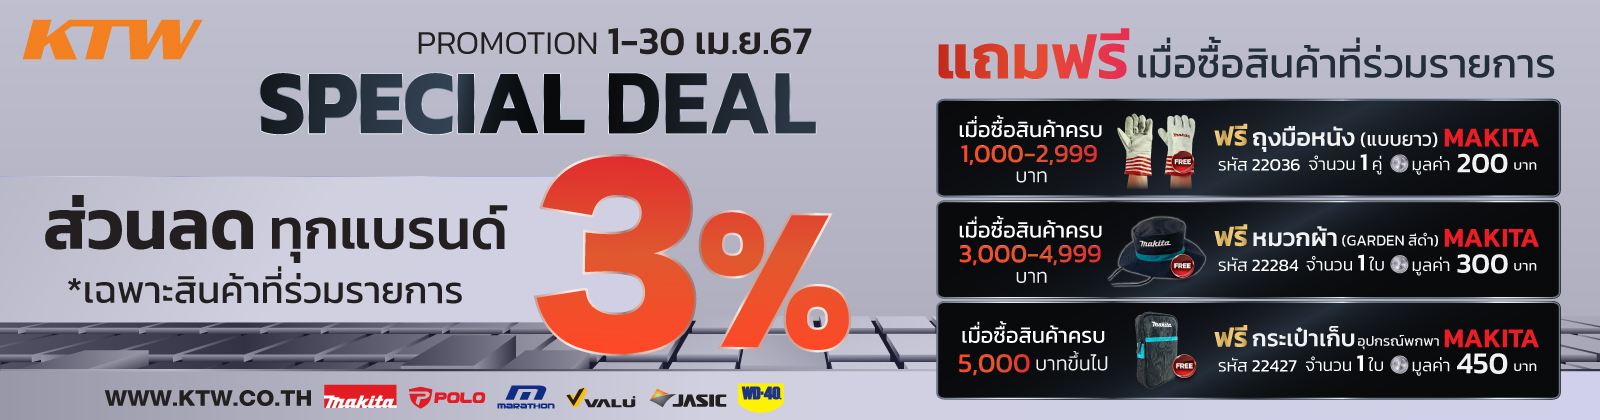 Special-Deal-ก.ค.66-1900x650.30.6.66